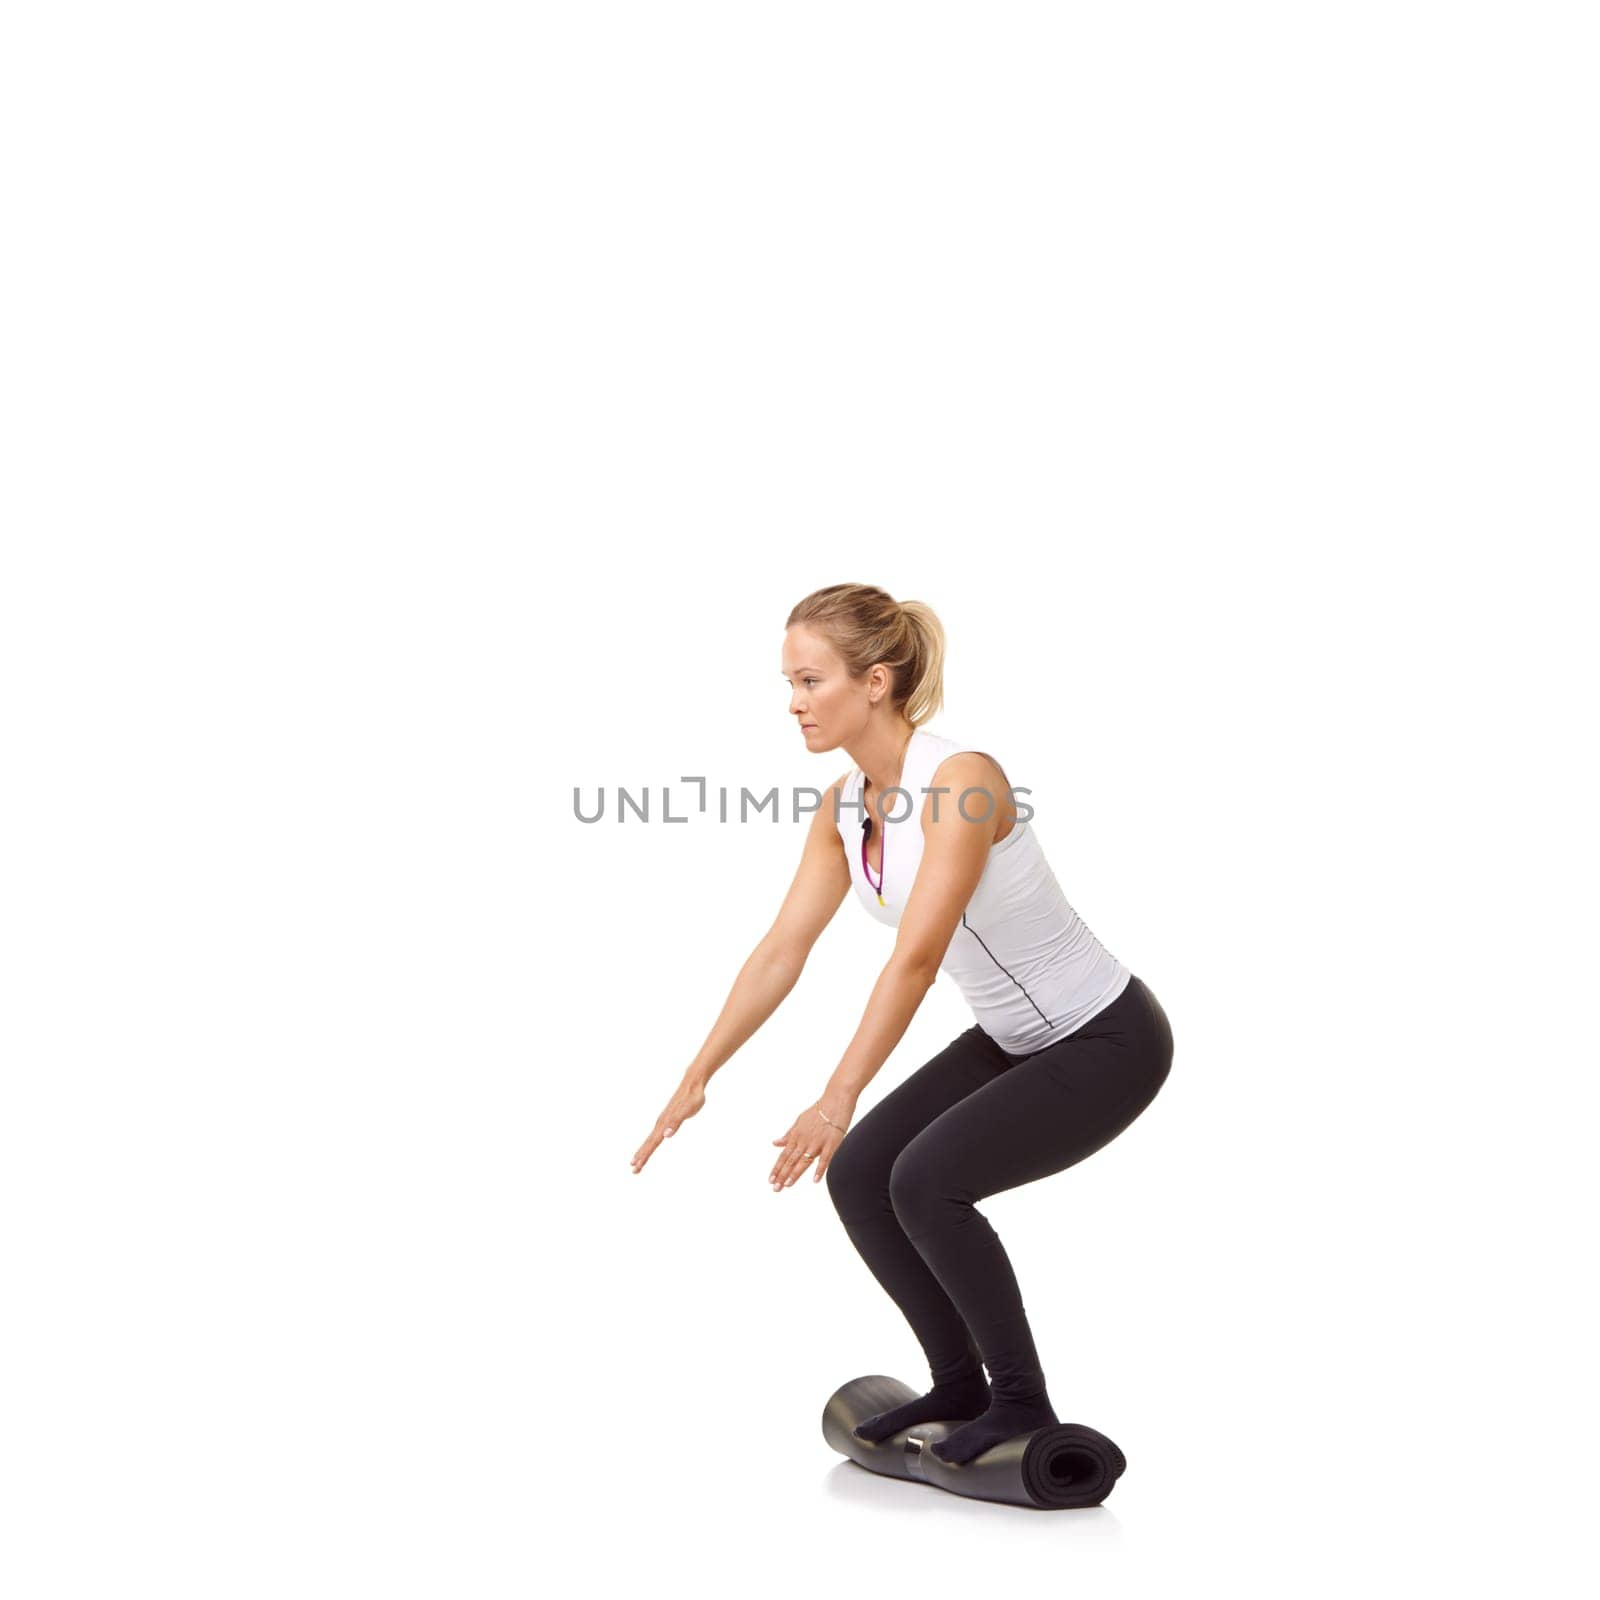 Woman, exercise and mat in studio for workout, pilates or fitness for healthy body, wellness or balance. Person, face and yoga in sportswear for physical activity on mock up space or white background.